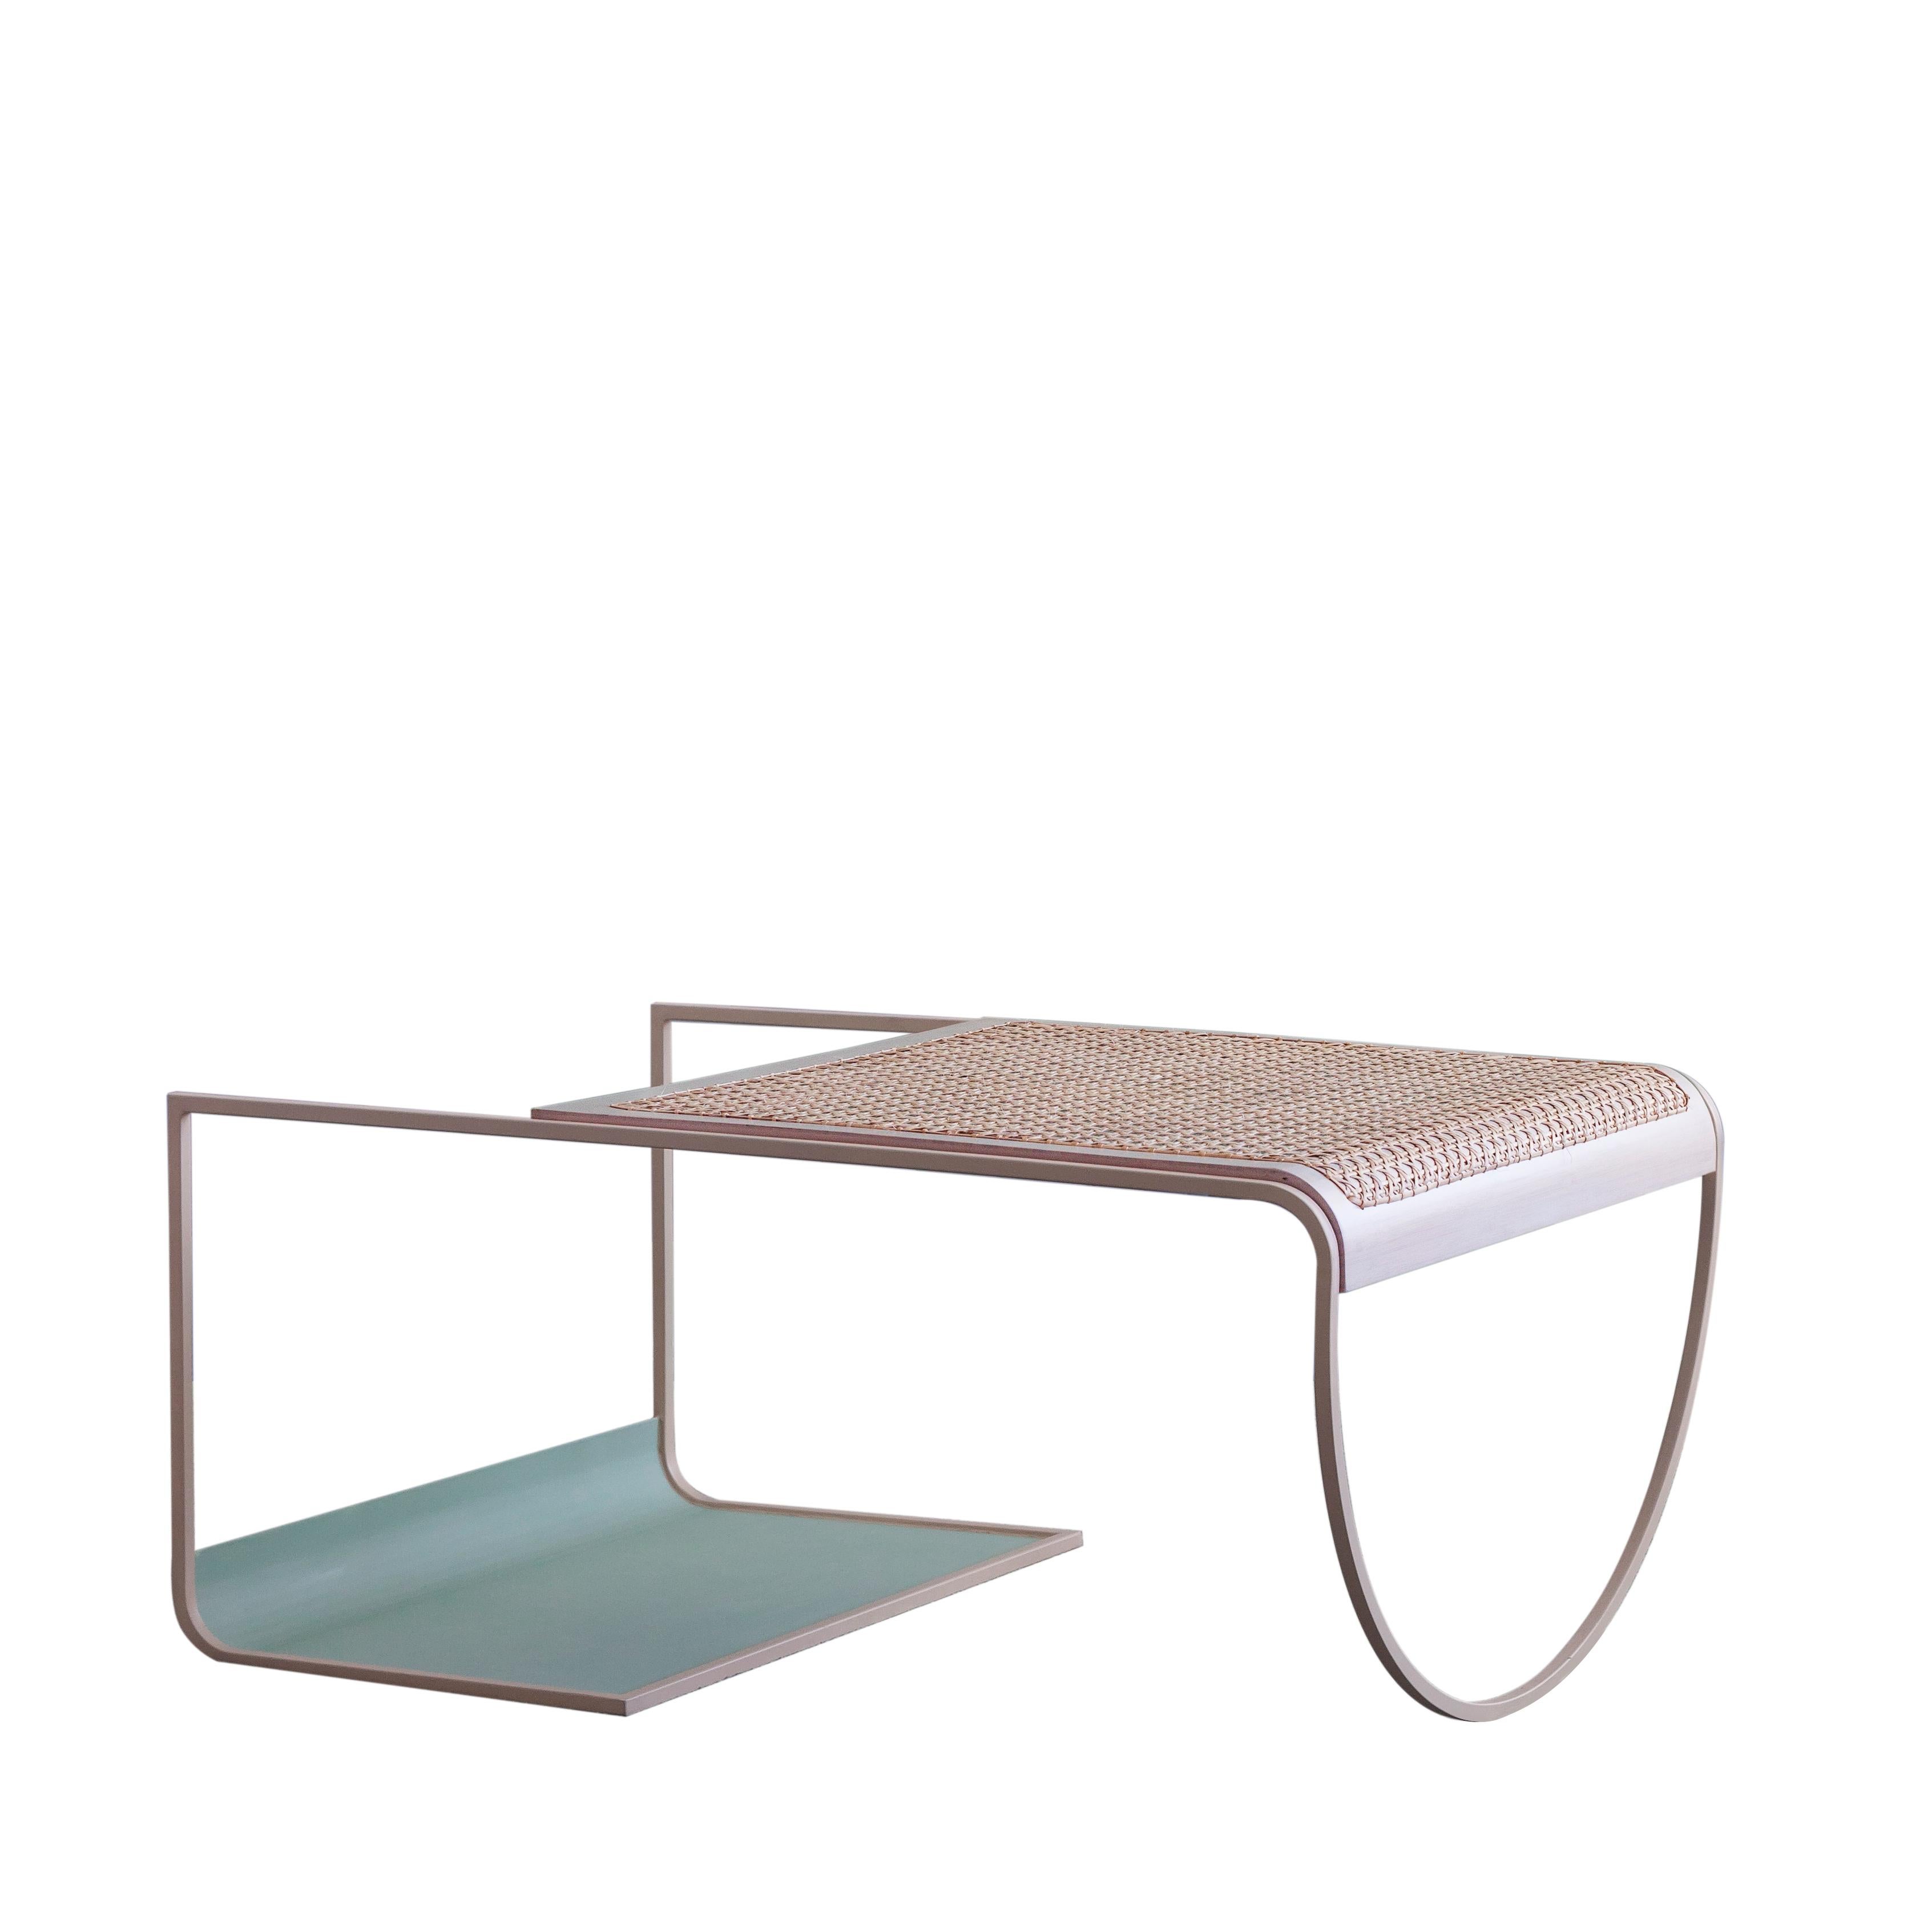 Cane SW coffee table by soft-geometry
Materials: Steel, handwoven cane
Dimensions: 36 x 24.5 x 17” H 

Simple, playful geometries form the light and fluid sw cane coffee table. The table perched on an arched-belly base on one side and a rolled rack